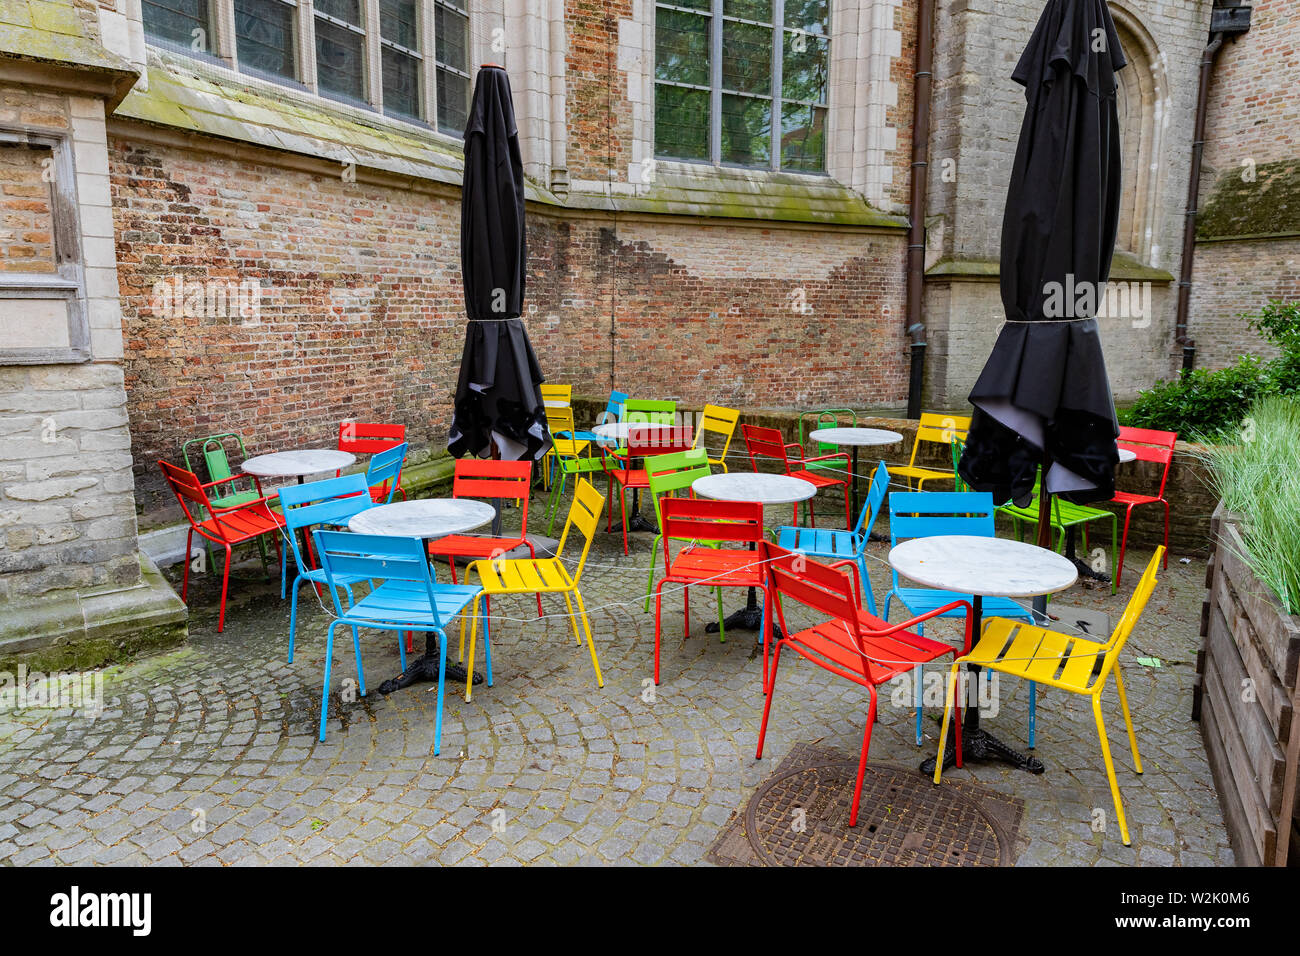 Brightly Coloured Table And Chairs Stockfotos Brightly Coloured